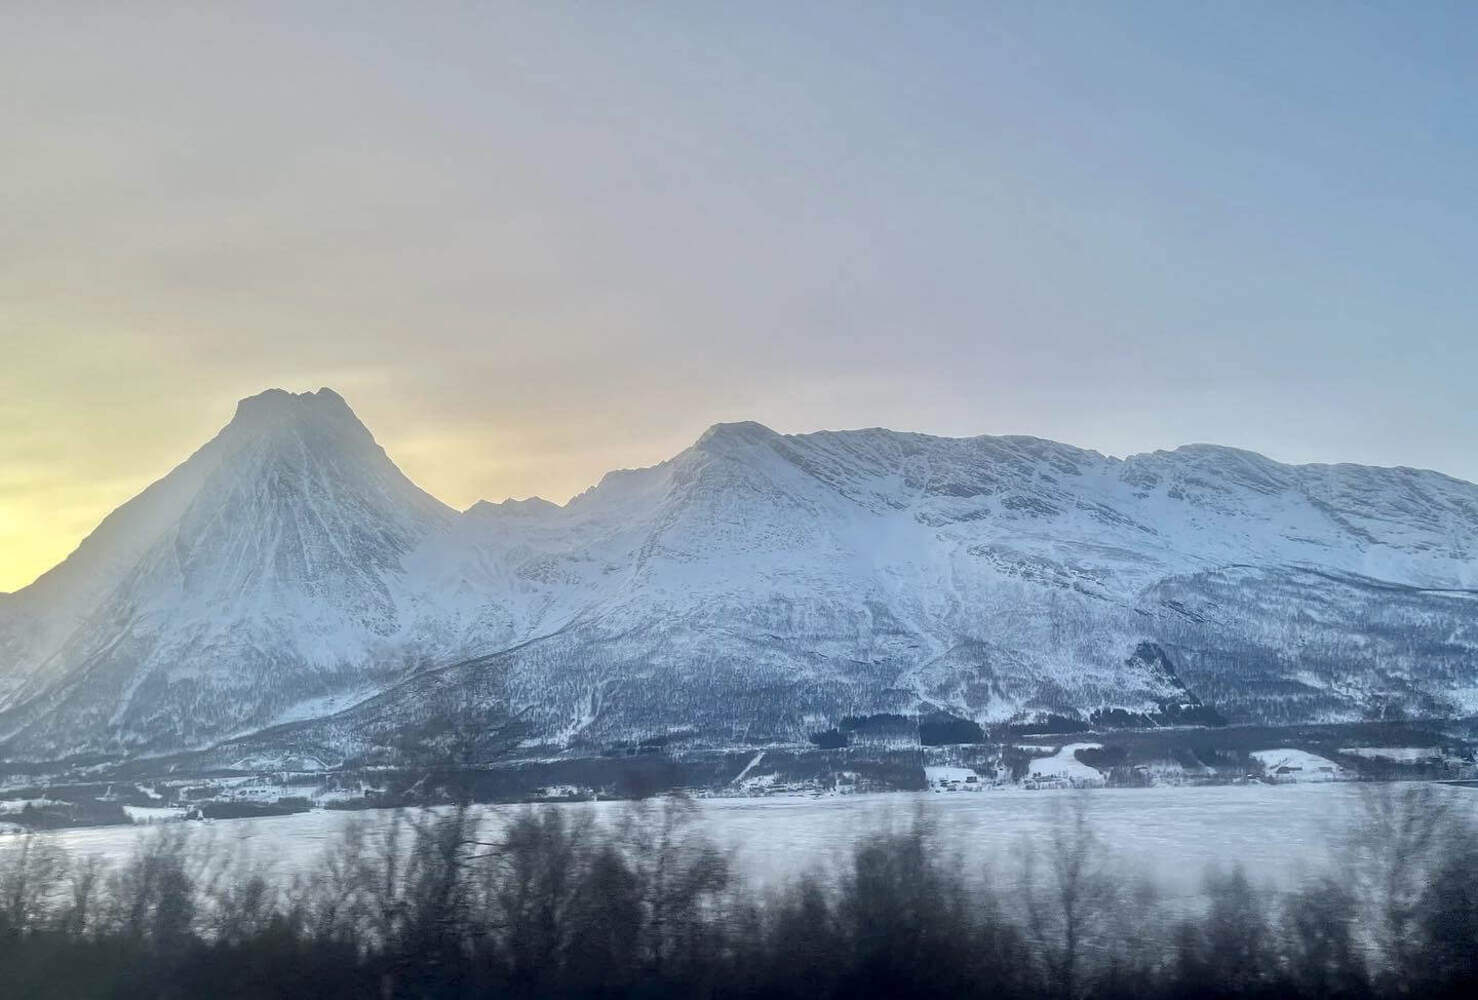 mountain and fjords near tromso